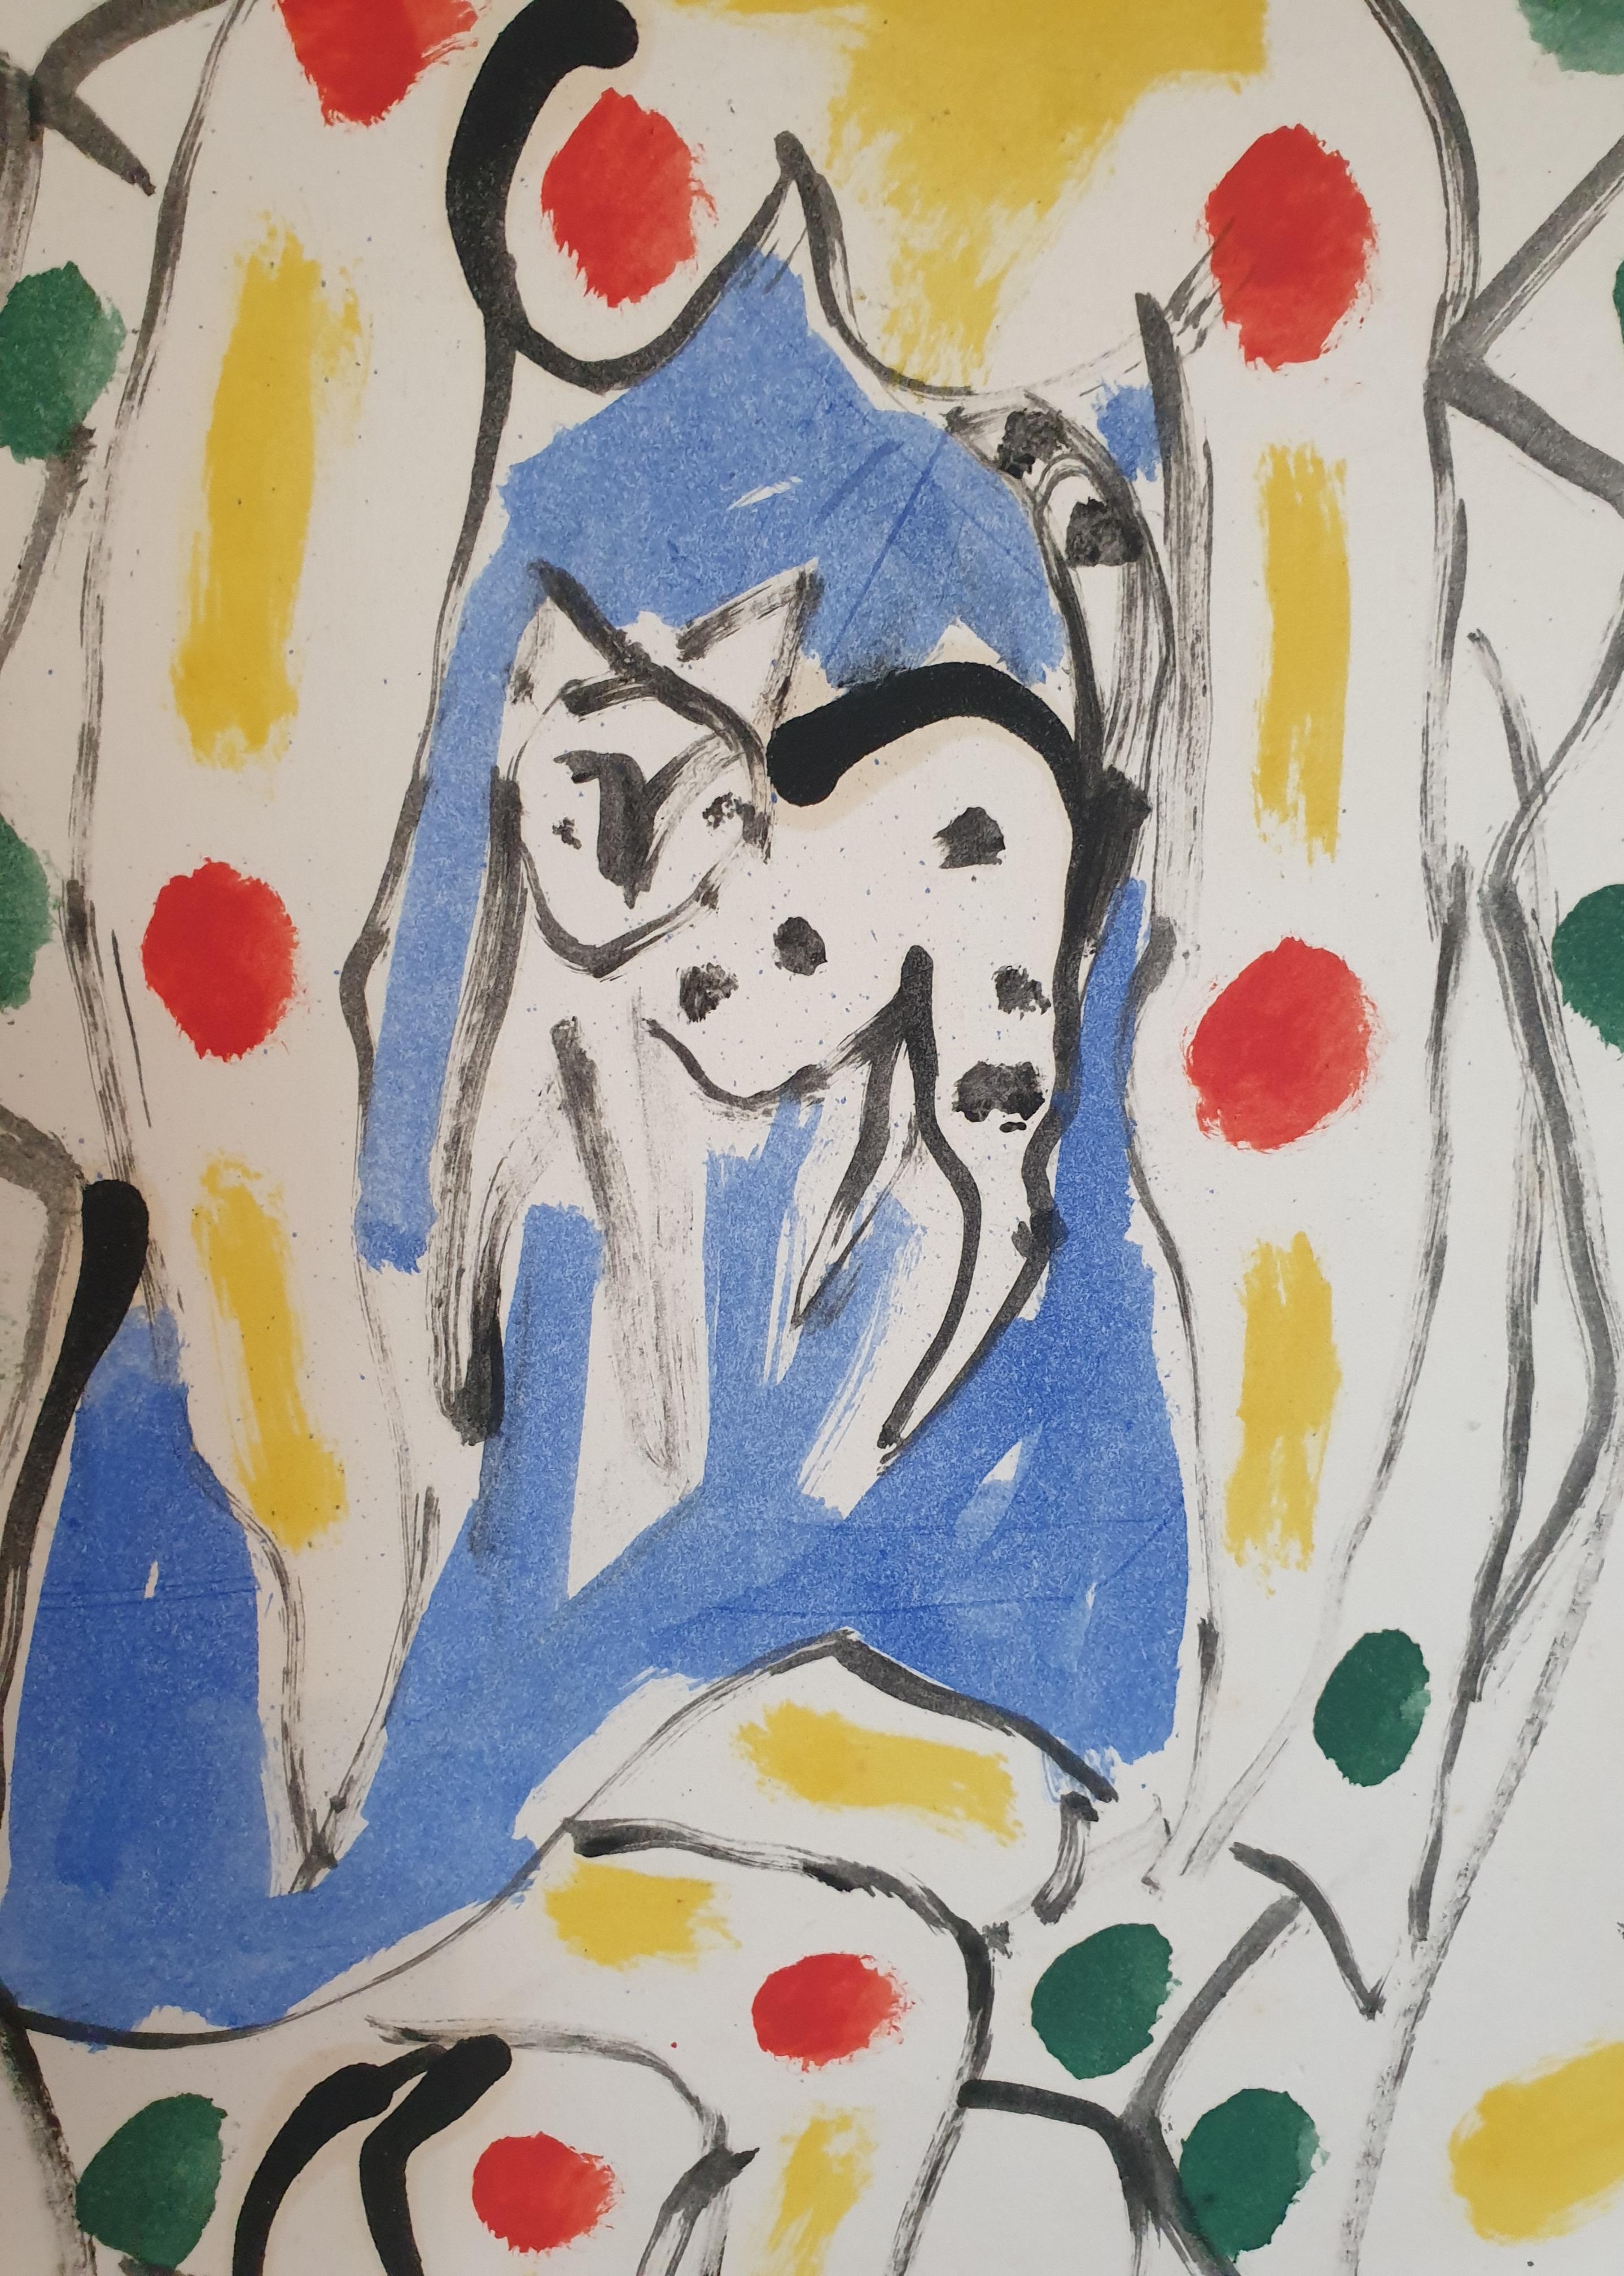 Woman Sitting With A Cat. Abstract Expressionist Work on Paper. 4